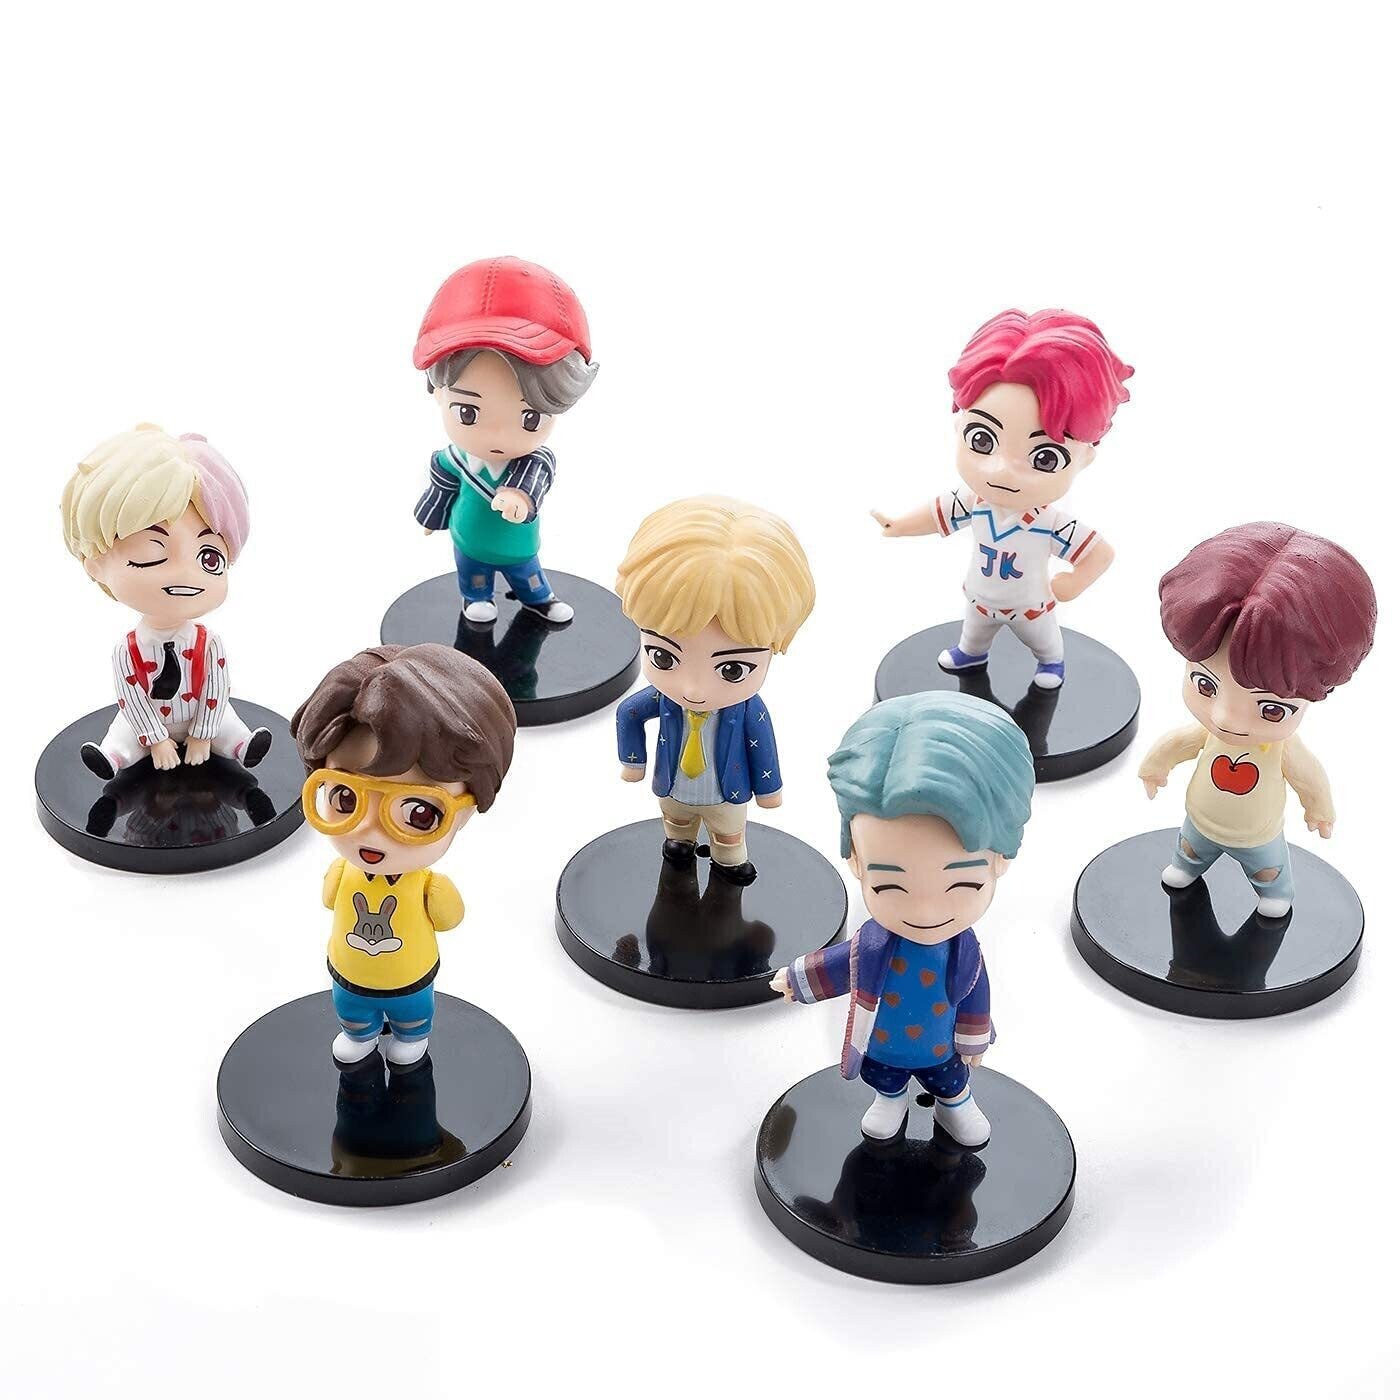 Toys Set of 7 Kpop BTS Tiny Tans Action Figure Set Or Cake Topper Decoration Merchandise Showpiece for BTS Army to Keep in Office Desk Table Gift Kpop Lovers Toys D1 Multicolor